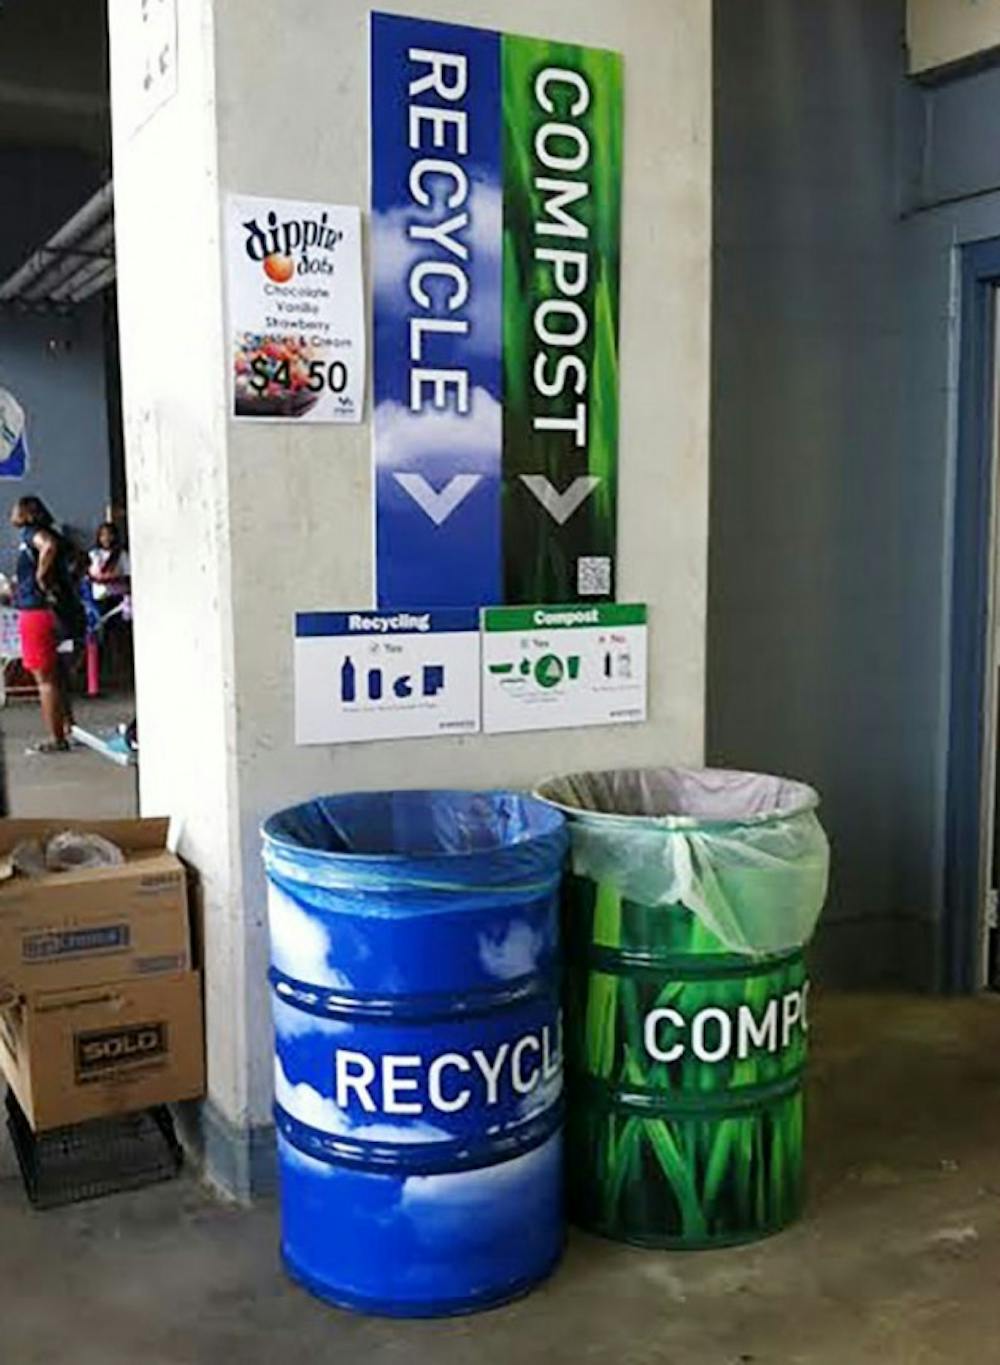 &nbsp; &nbsp; The Environmental Network and the
Office of Sustainability are working to make
UB a Zero Waste university - one in which all
of the campus&rsquo; waste is diverted
from a landfill. Efforts like installing
more recycling and compost
bins at UB Stadium encourage students
to help make a difference in global climate change.
Courtesy of Holly Kistner